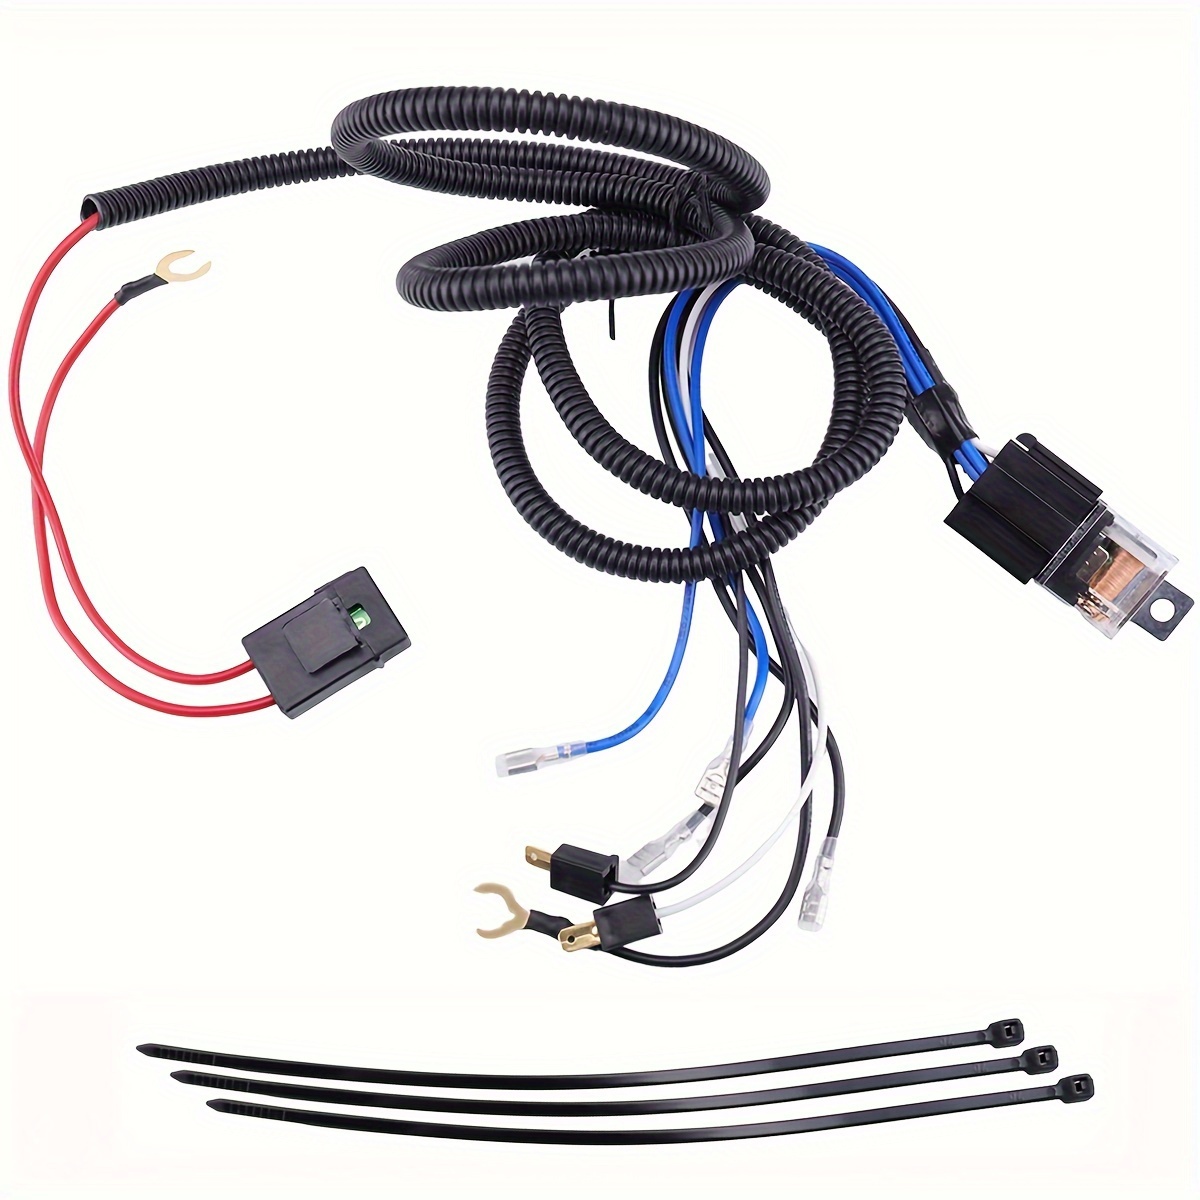 12V Electric Snail Horn Kit with Relay Harness & Button Car Horns